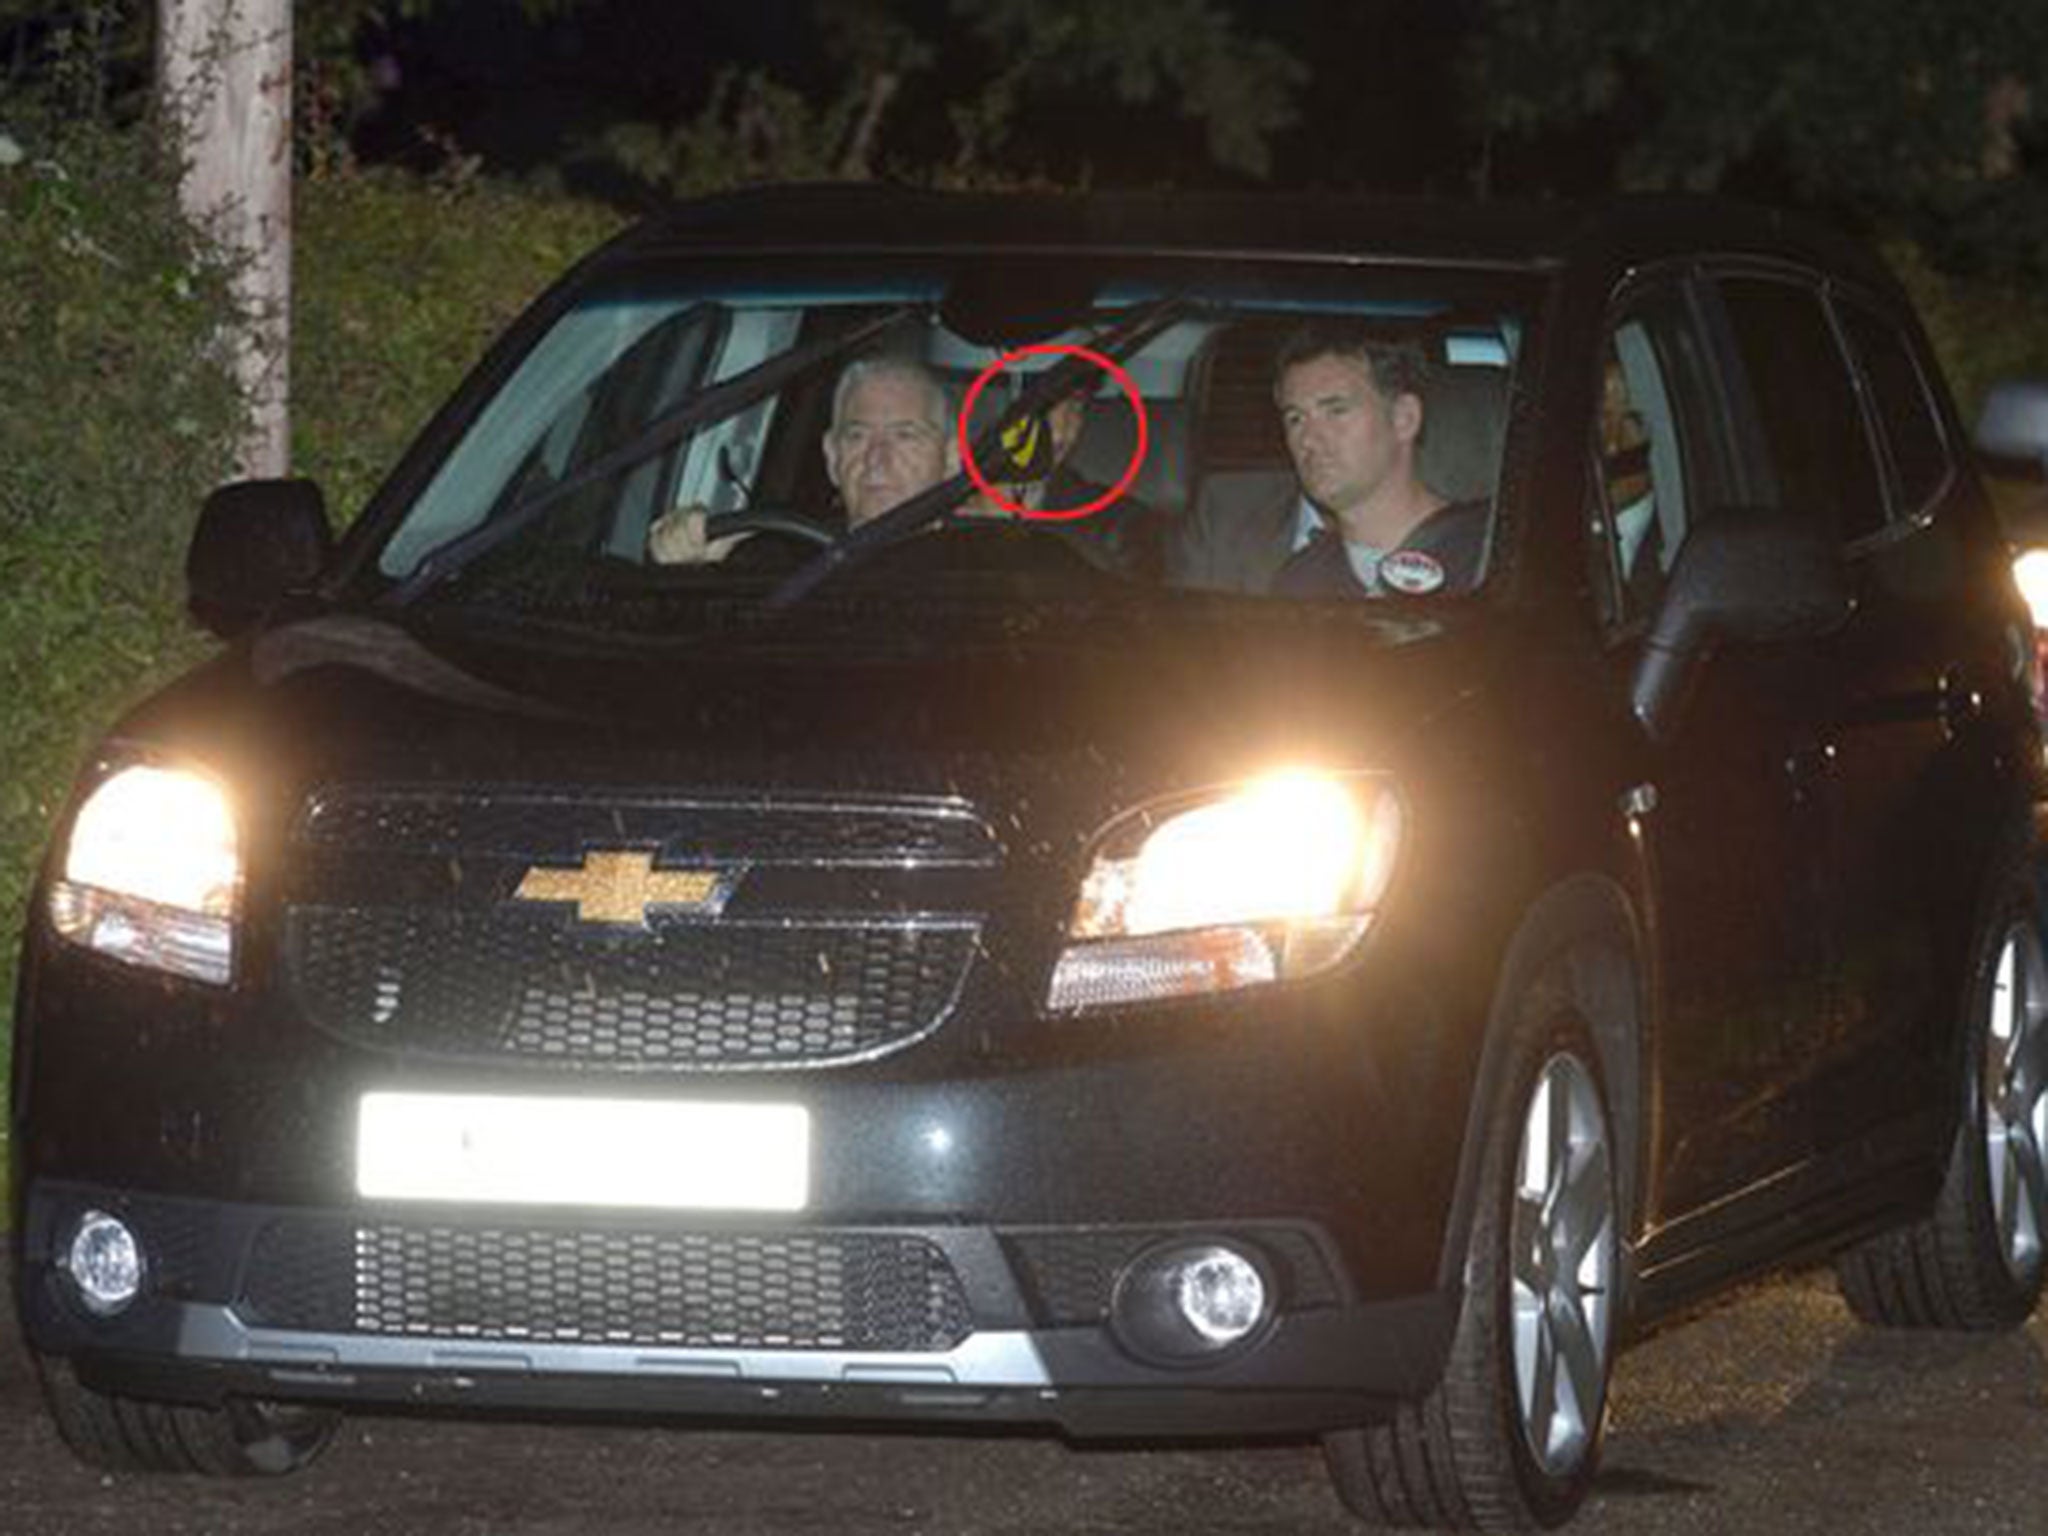 Angel Di Maria arrives at Manchester United's Carrington training ground on Monday night